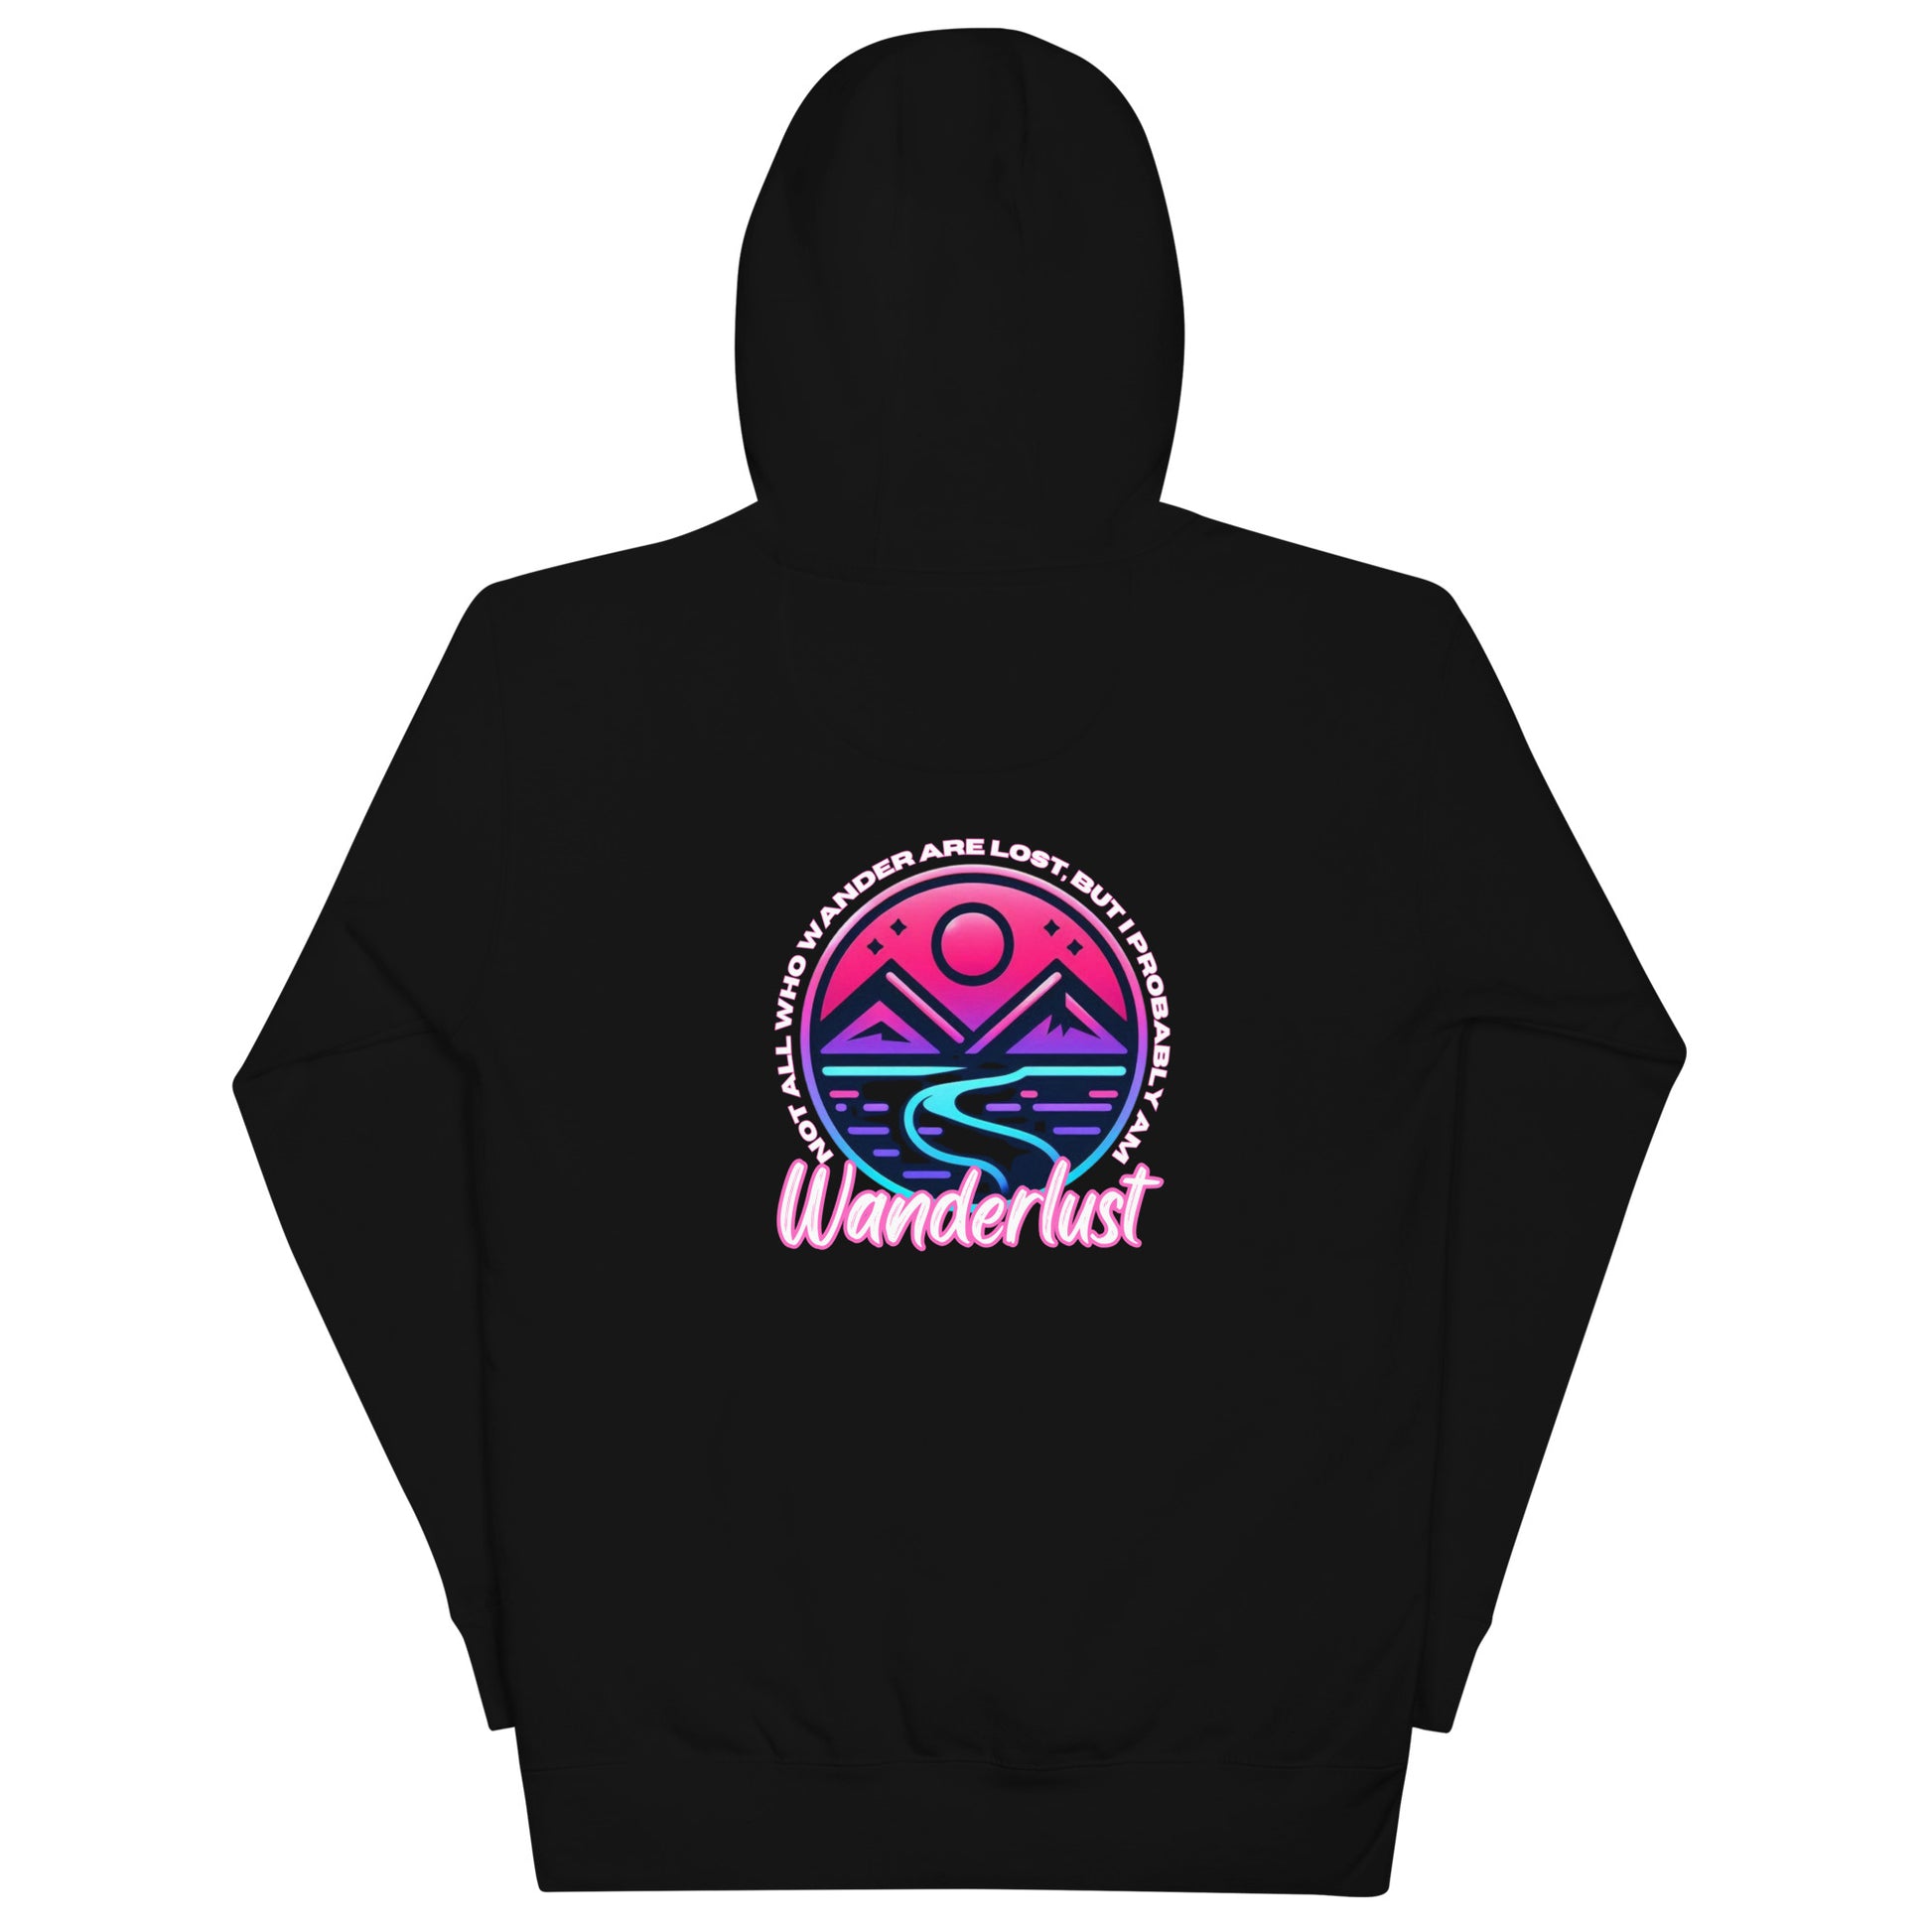 a black hoodie with the words wanderist on it